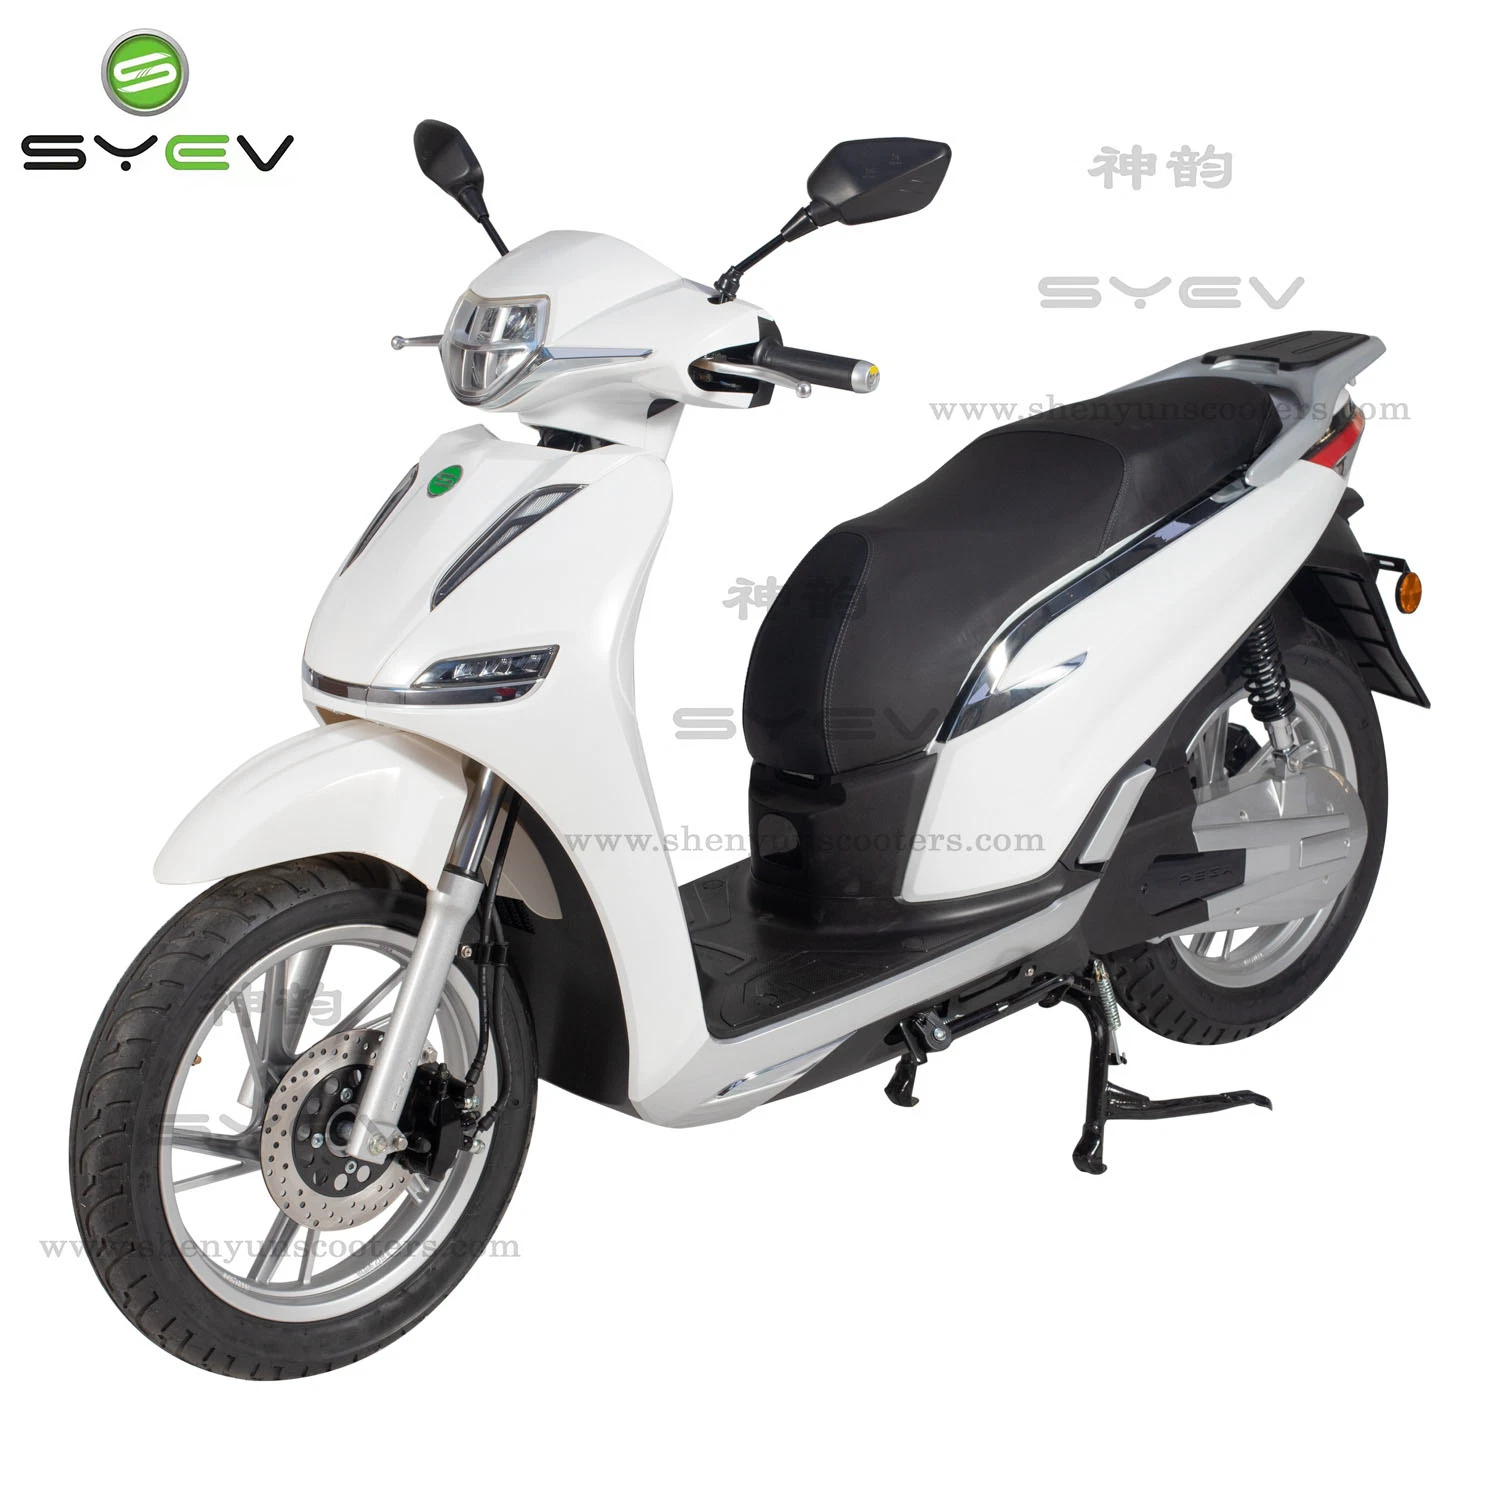 Long Distance 145km Fashionable Motorcycle Electric Scooter T500 From Syev